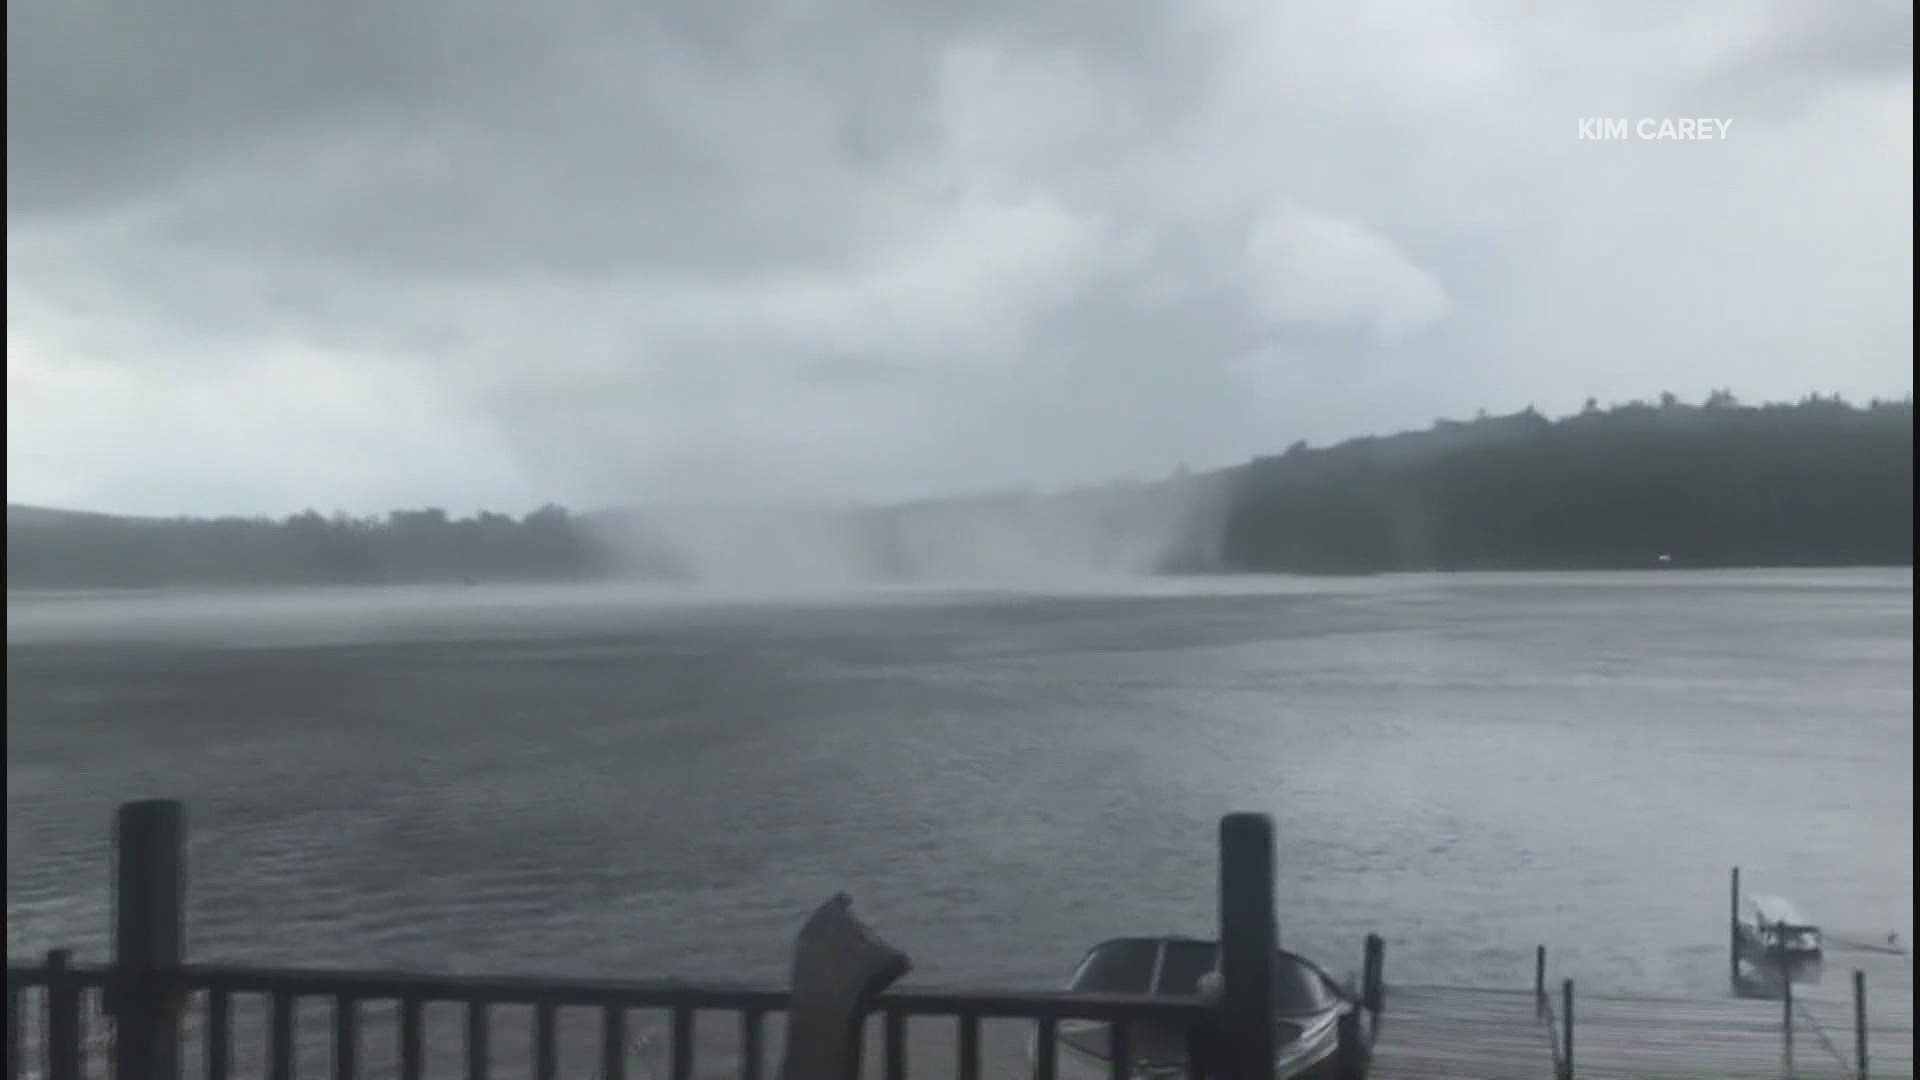 Here's the video of the tornado captured by Kim Carey at her home in Sebago.